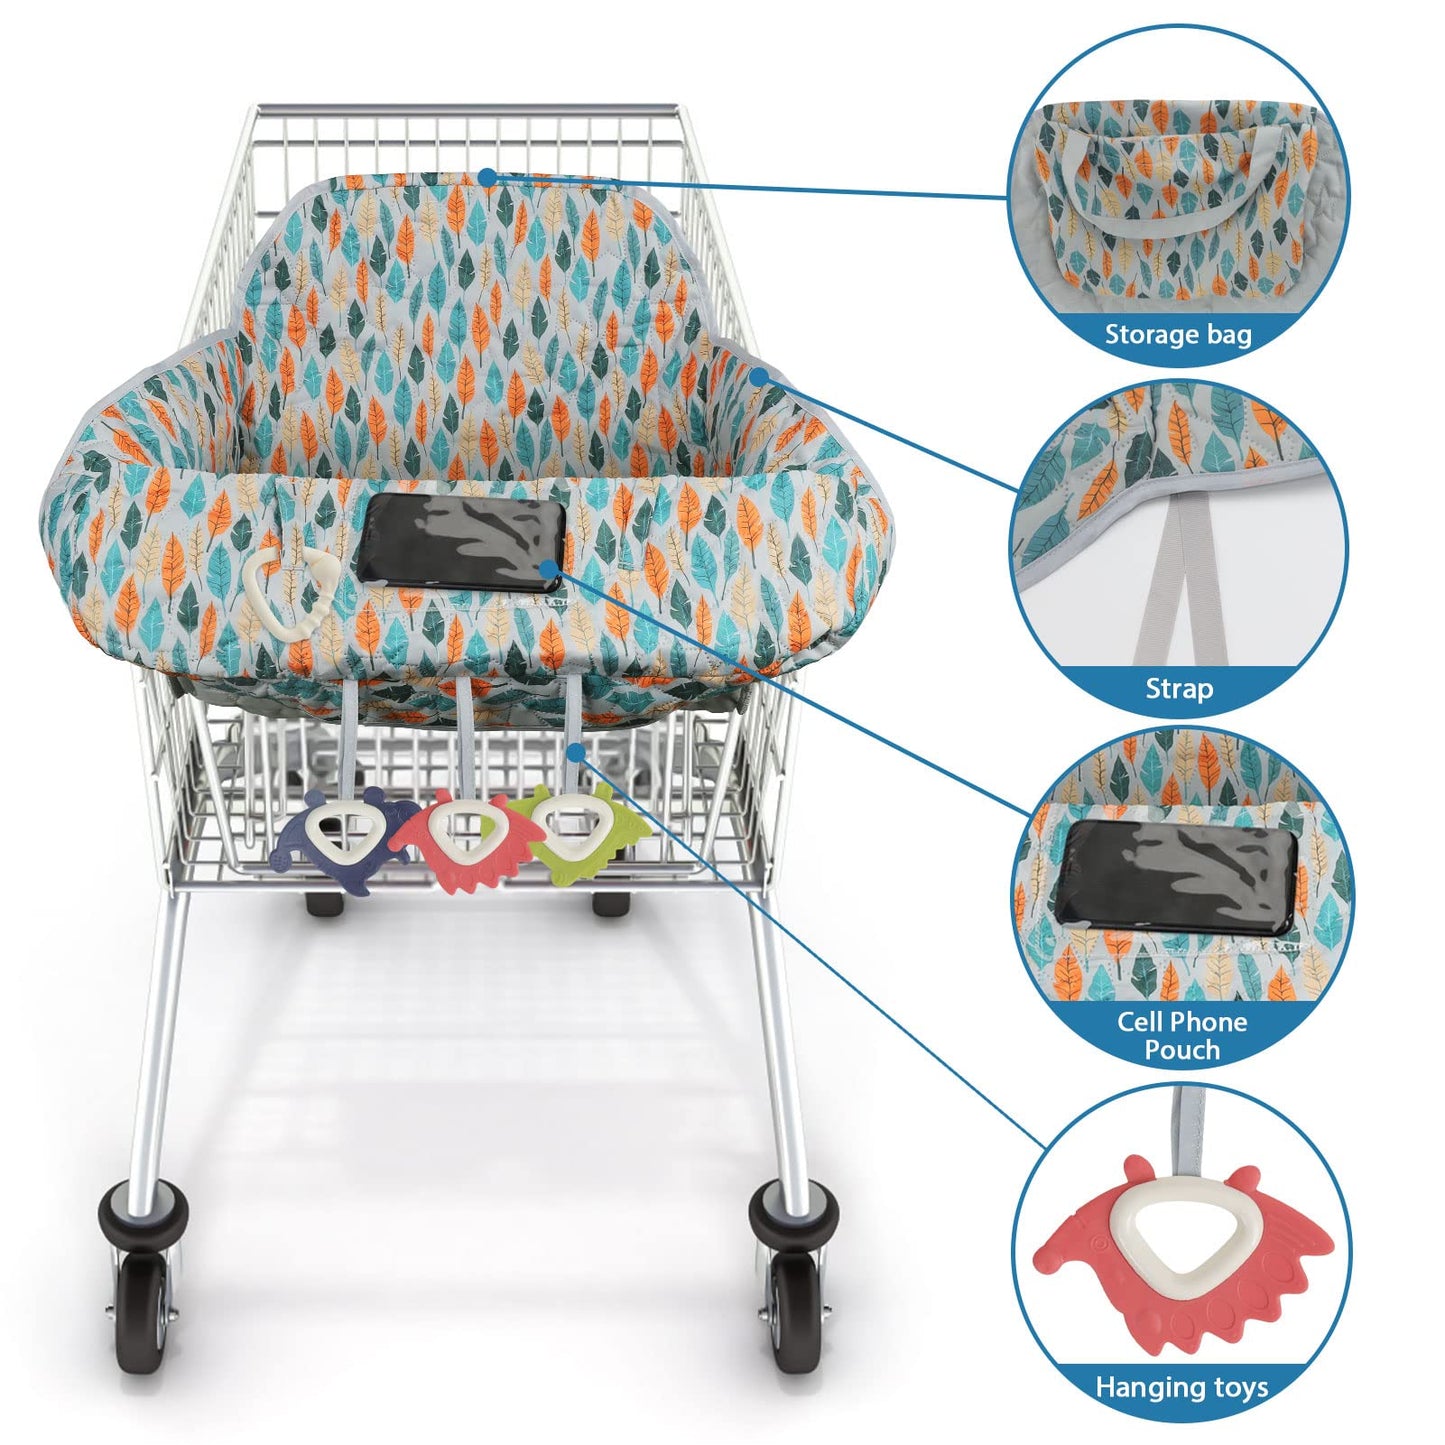 Baby Shopping Cart Cover for Babies - 2 in 1 High Chair Cover Grocery Cart Cover for Baby, Foldable Machine Washable Baby Cart Cover for Boys Girls Infant Toddler